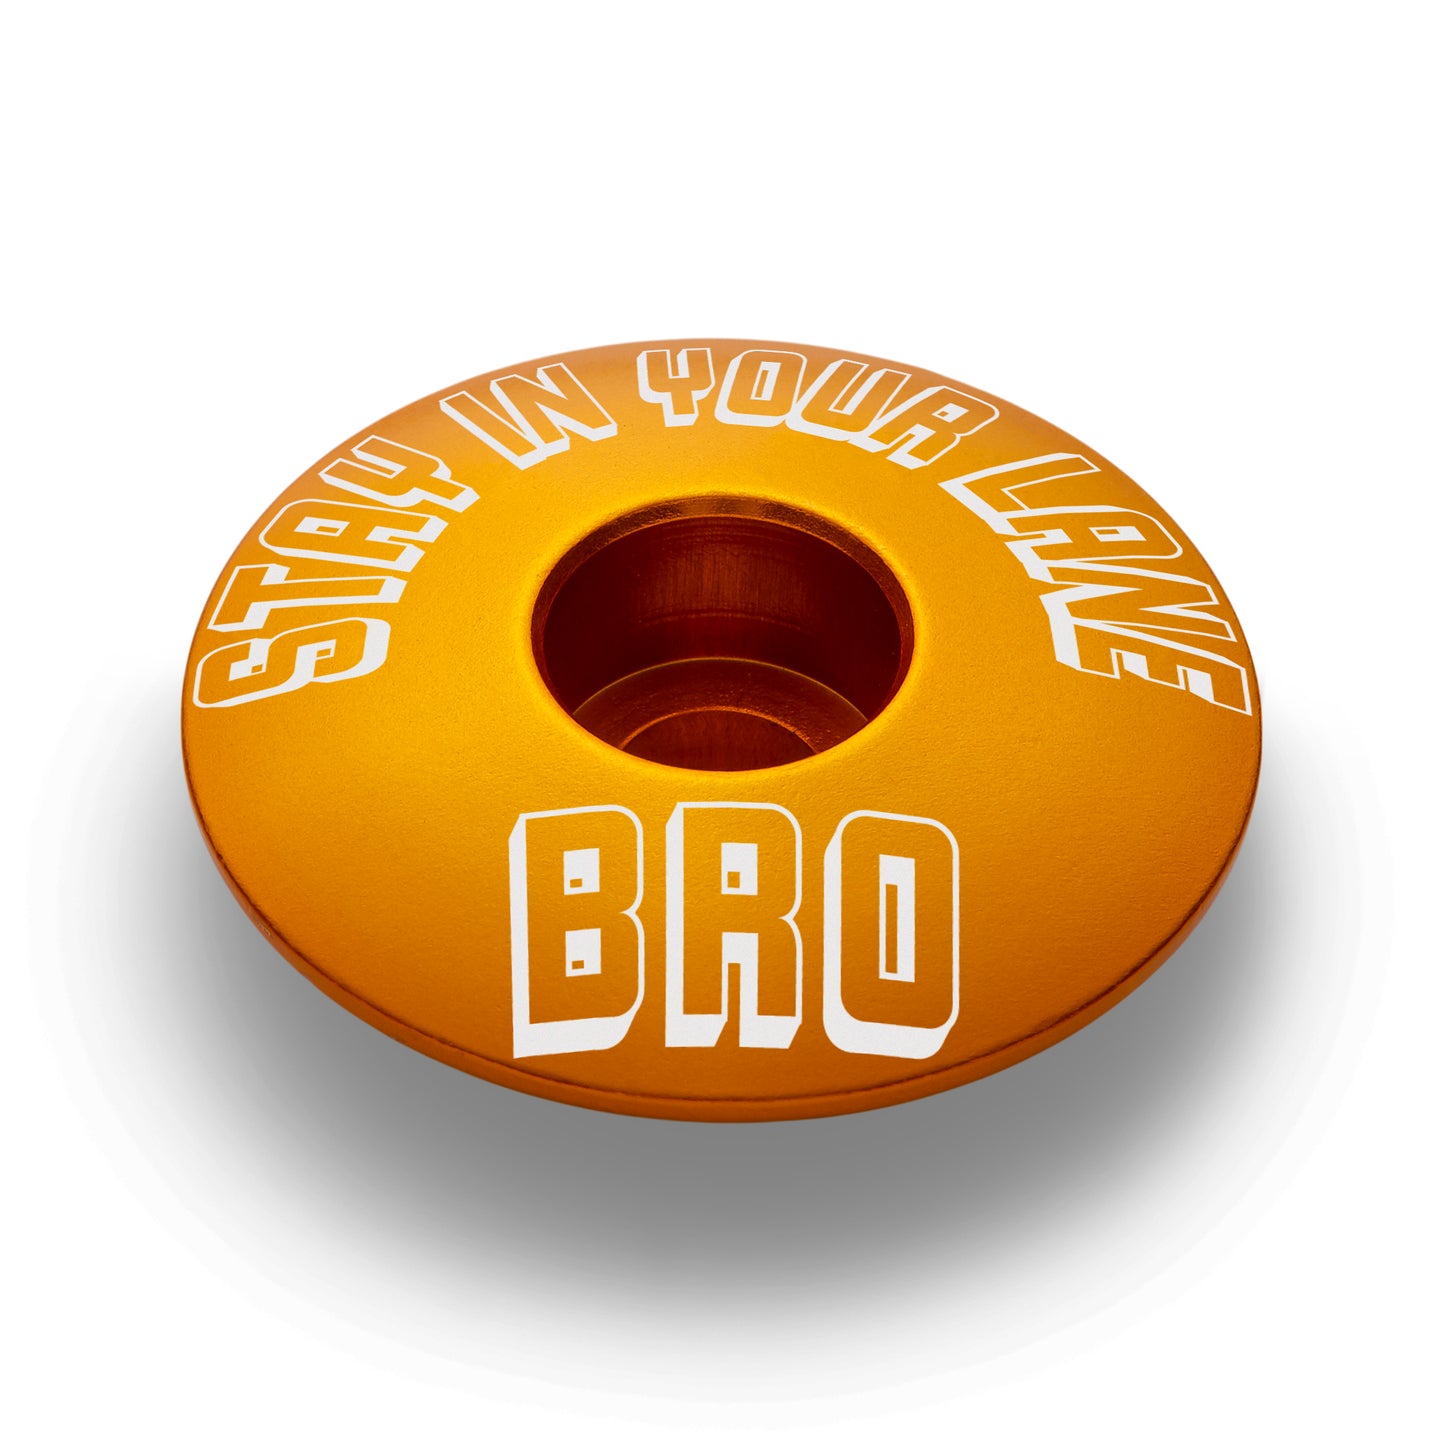 Stay In Your Lane, Bro - Bicycle Headset Cap